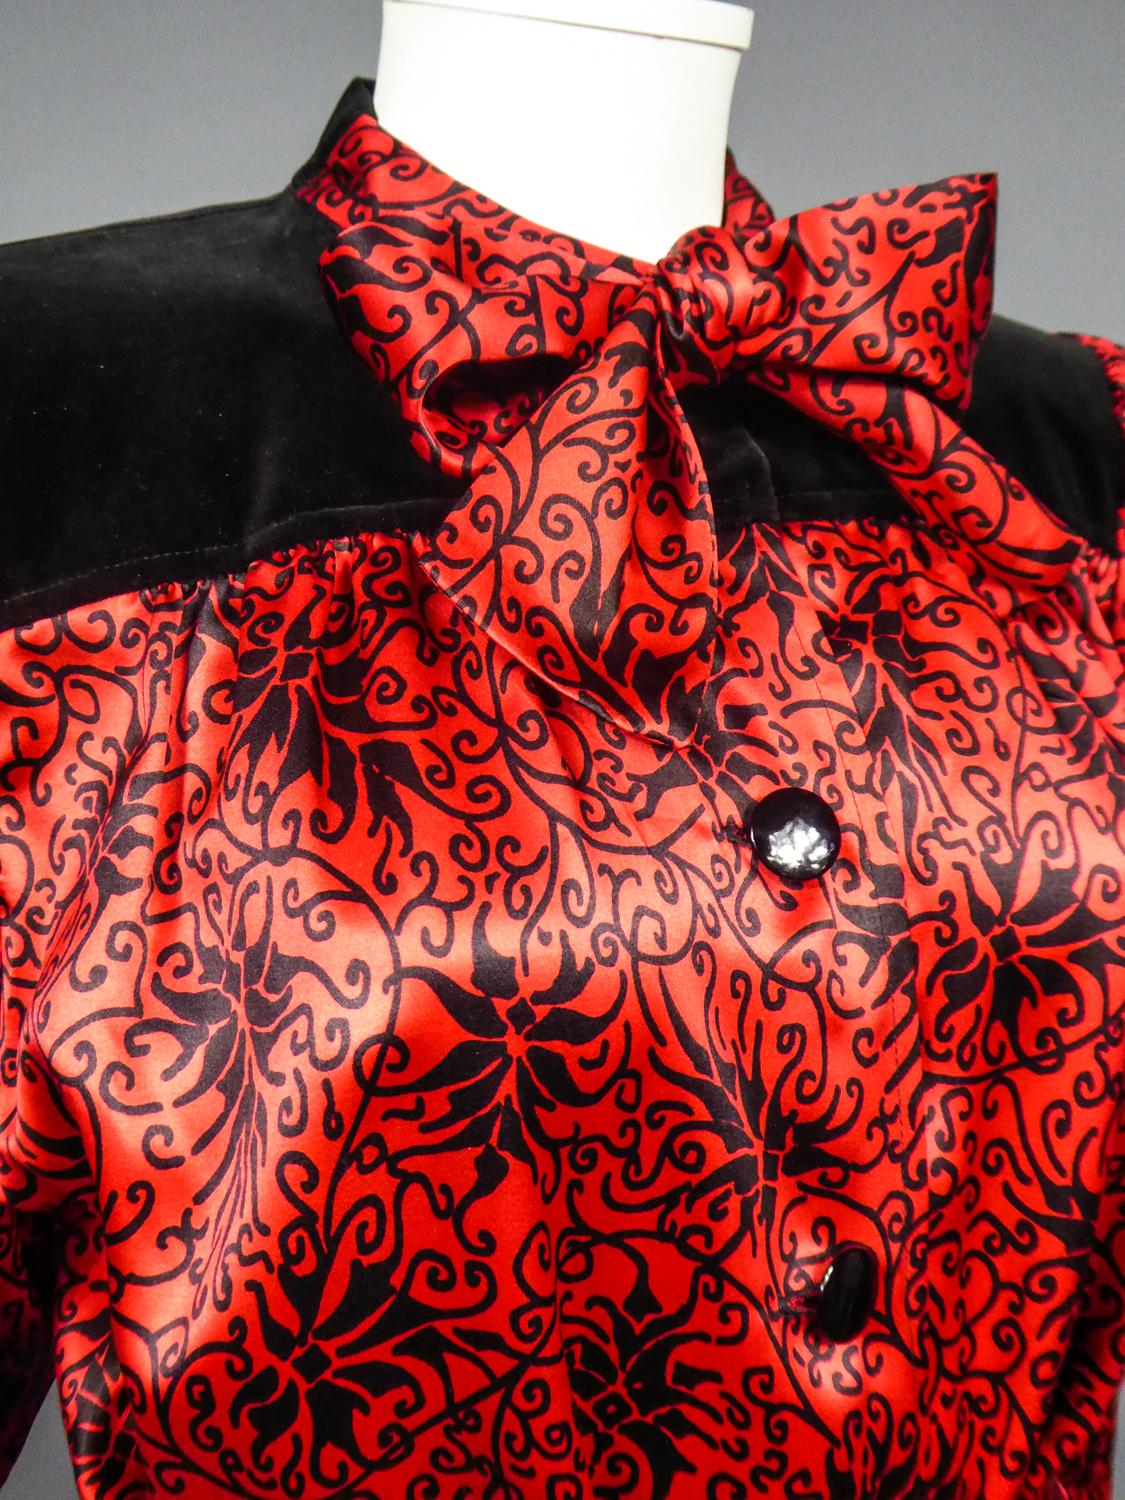 Yves Saint Laurent Variation Blouse Dress in Printed Satin Circa 1990 For Sale 3